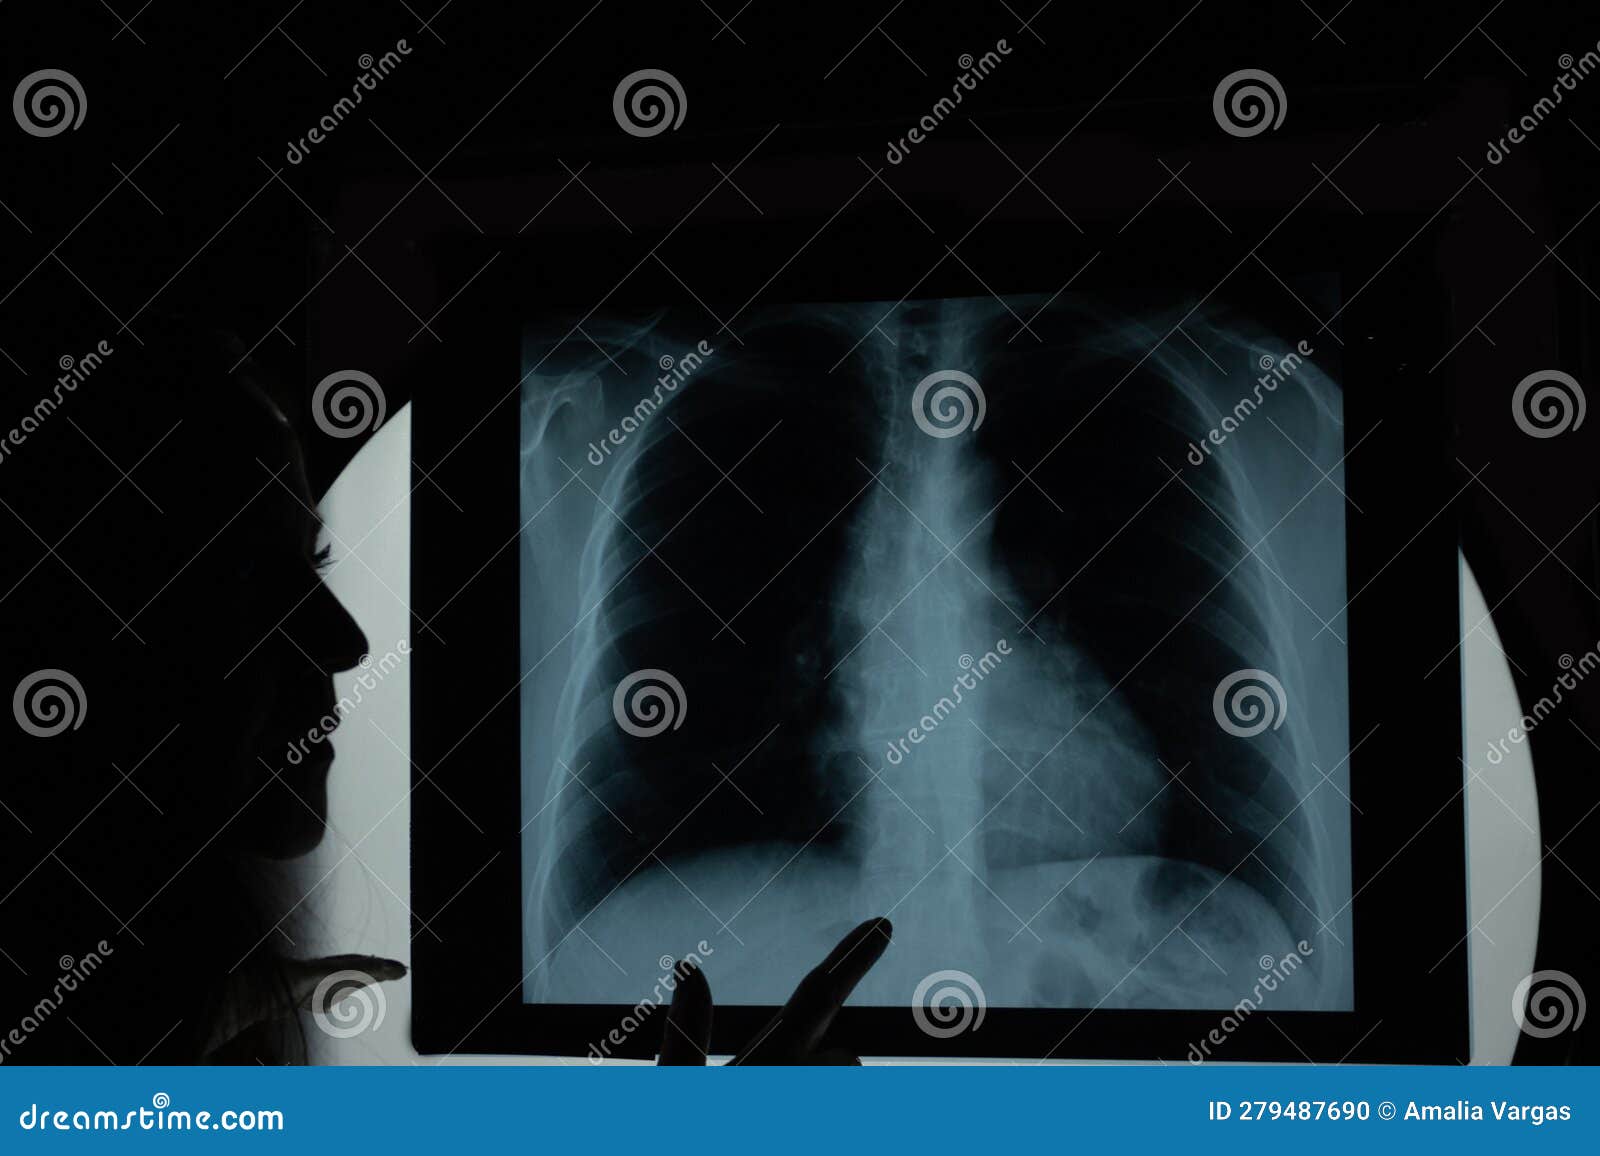 post anterior chest x-ray showing lung parenchyma homogeneous radiographic pattern and aortic button prominence reviewing by